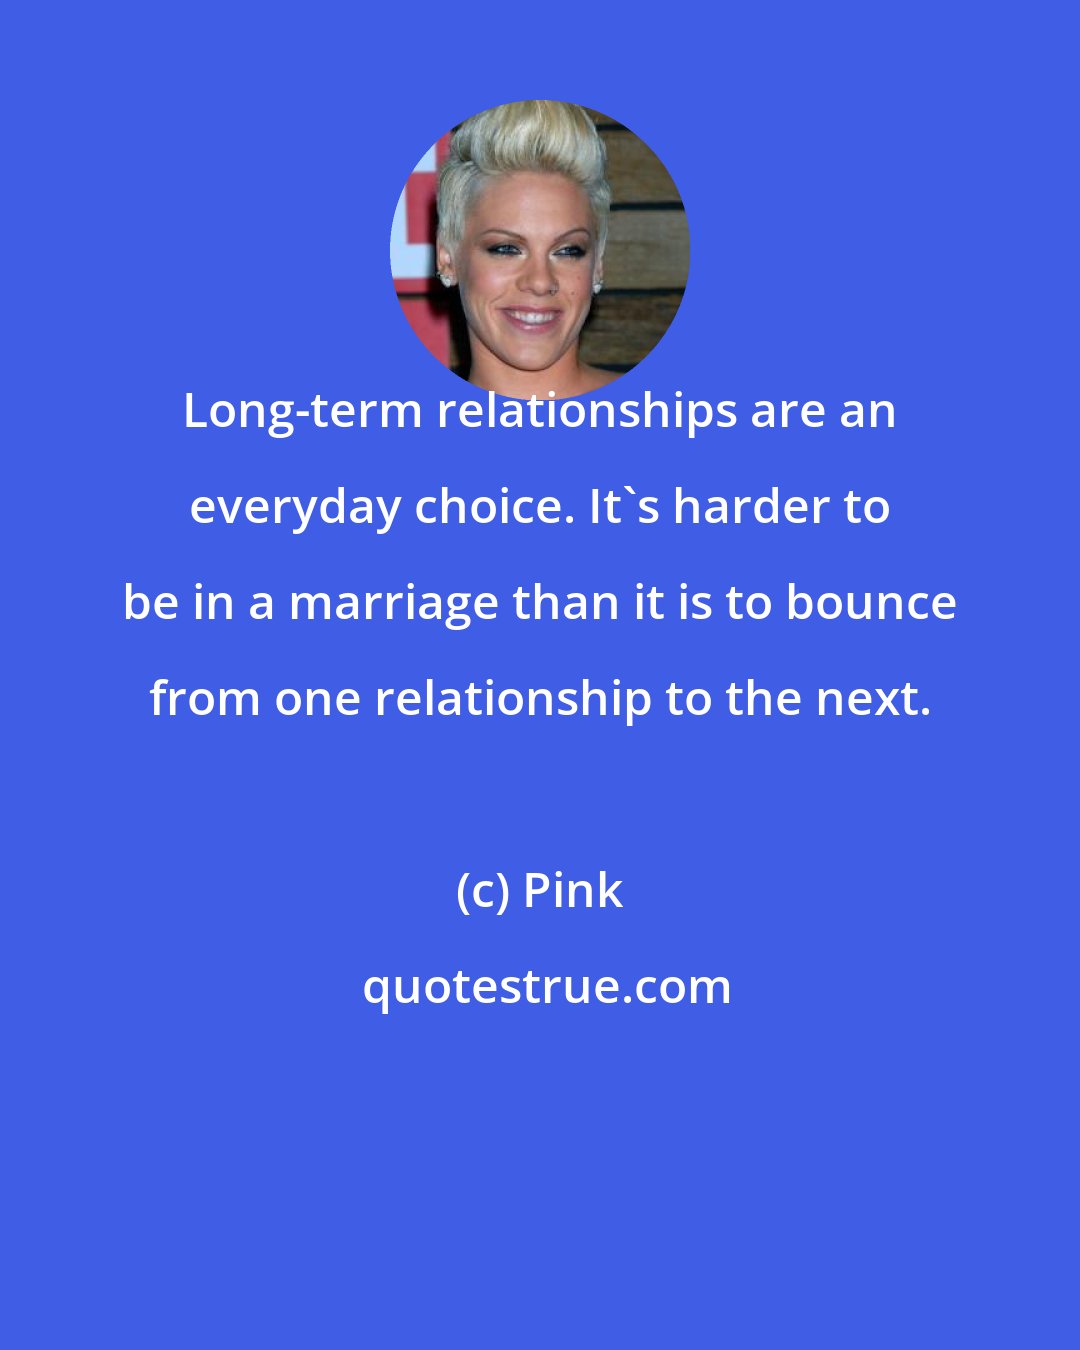 Pink: Long-term relationships are an everyday choice. It's harder to be in a marriage than it is to bounce from one relationship to the next.